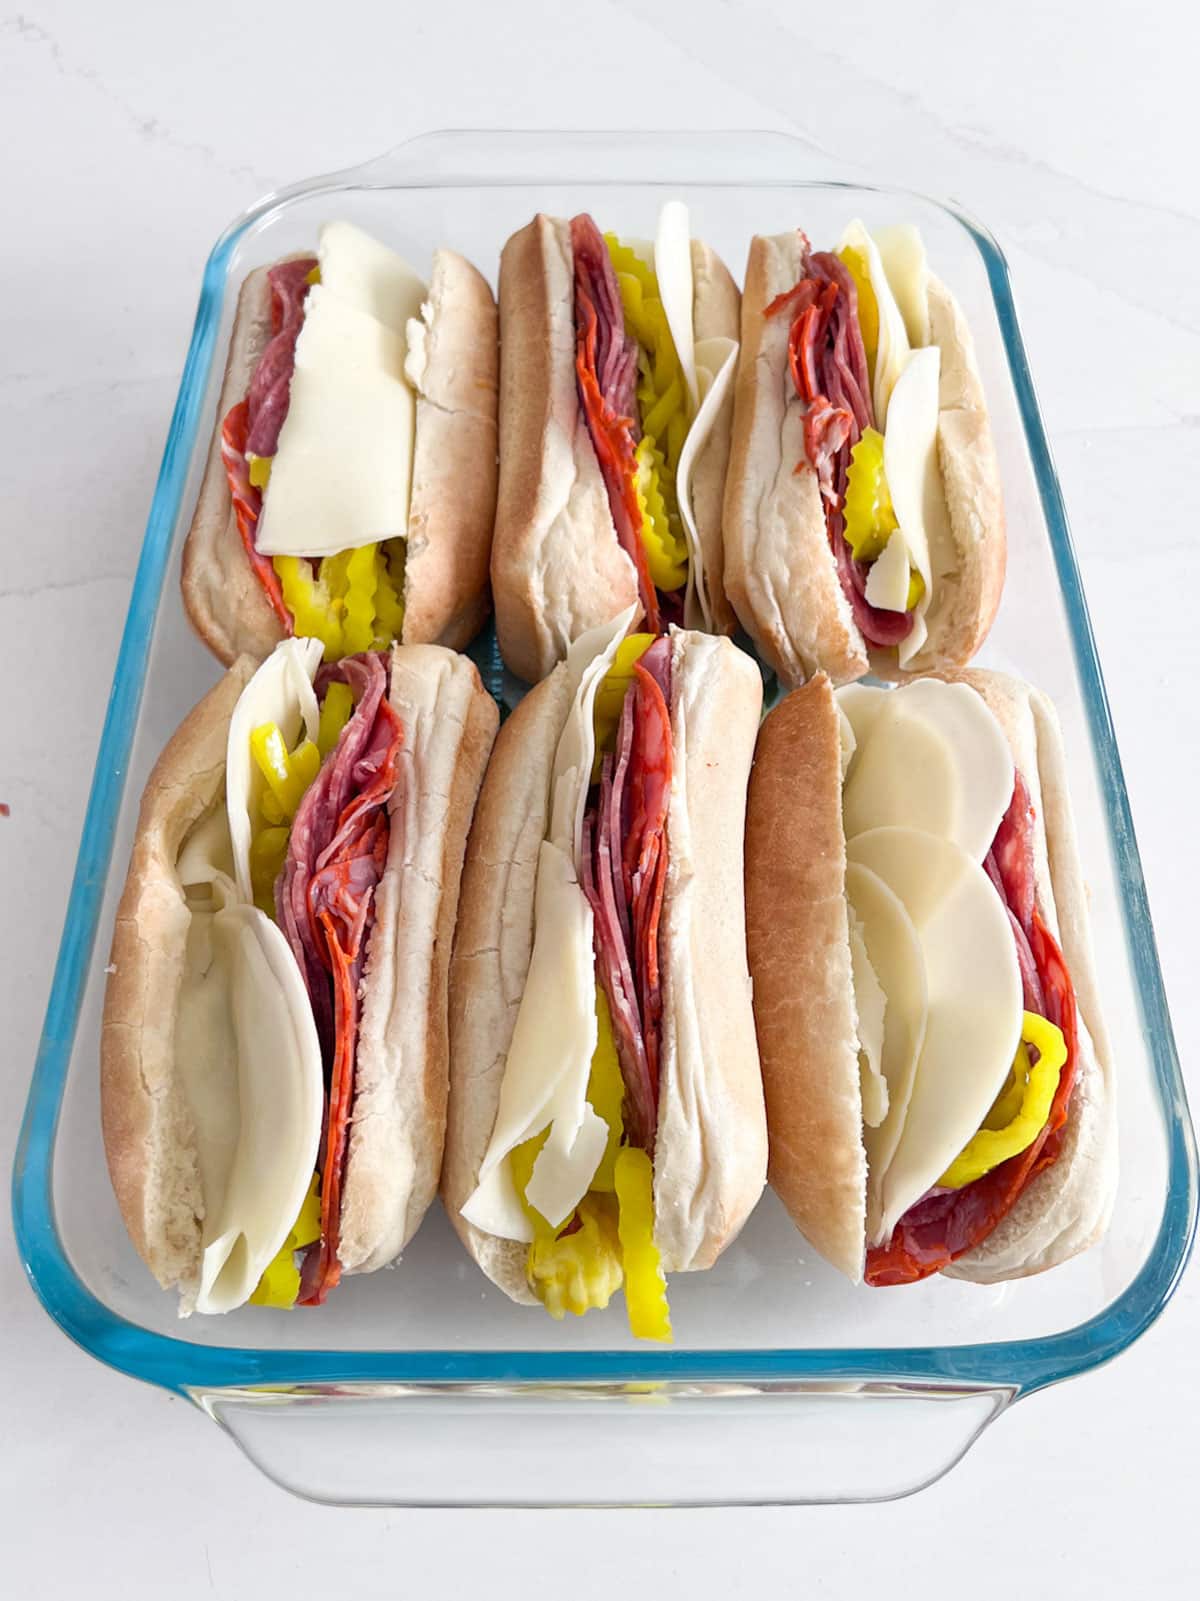 Grinder sandwiches filled with meats, cheese and banana peppers in a glass pan